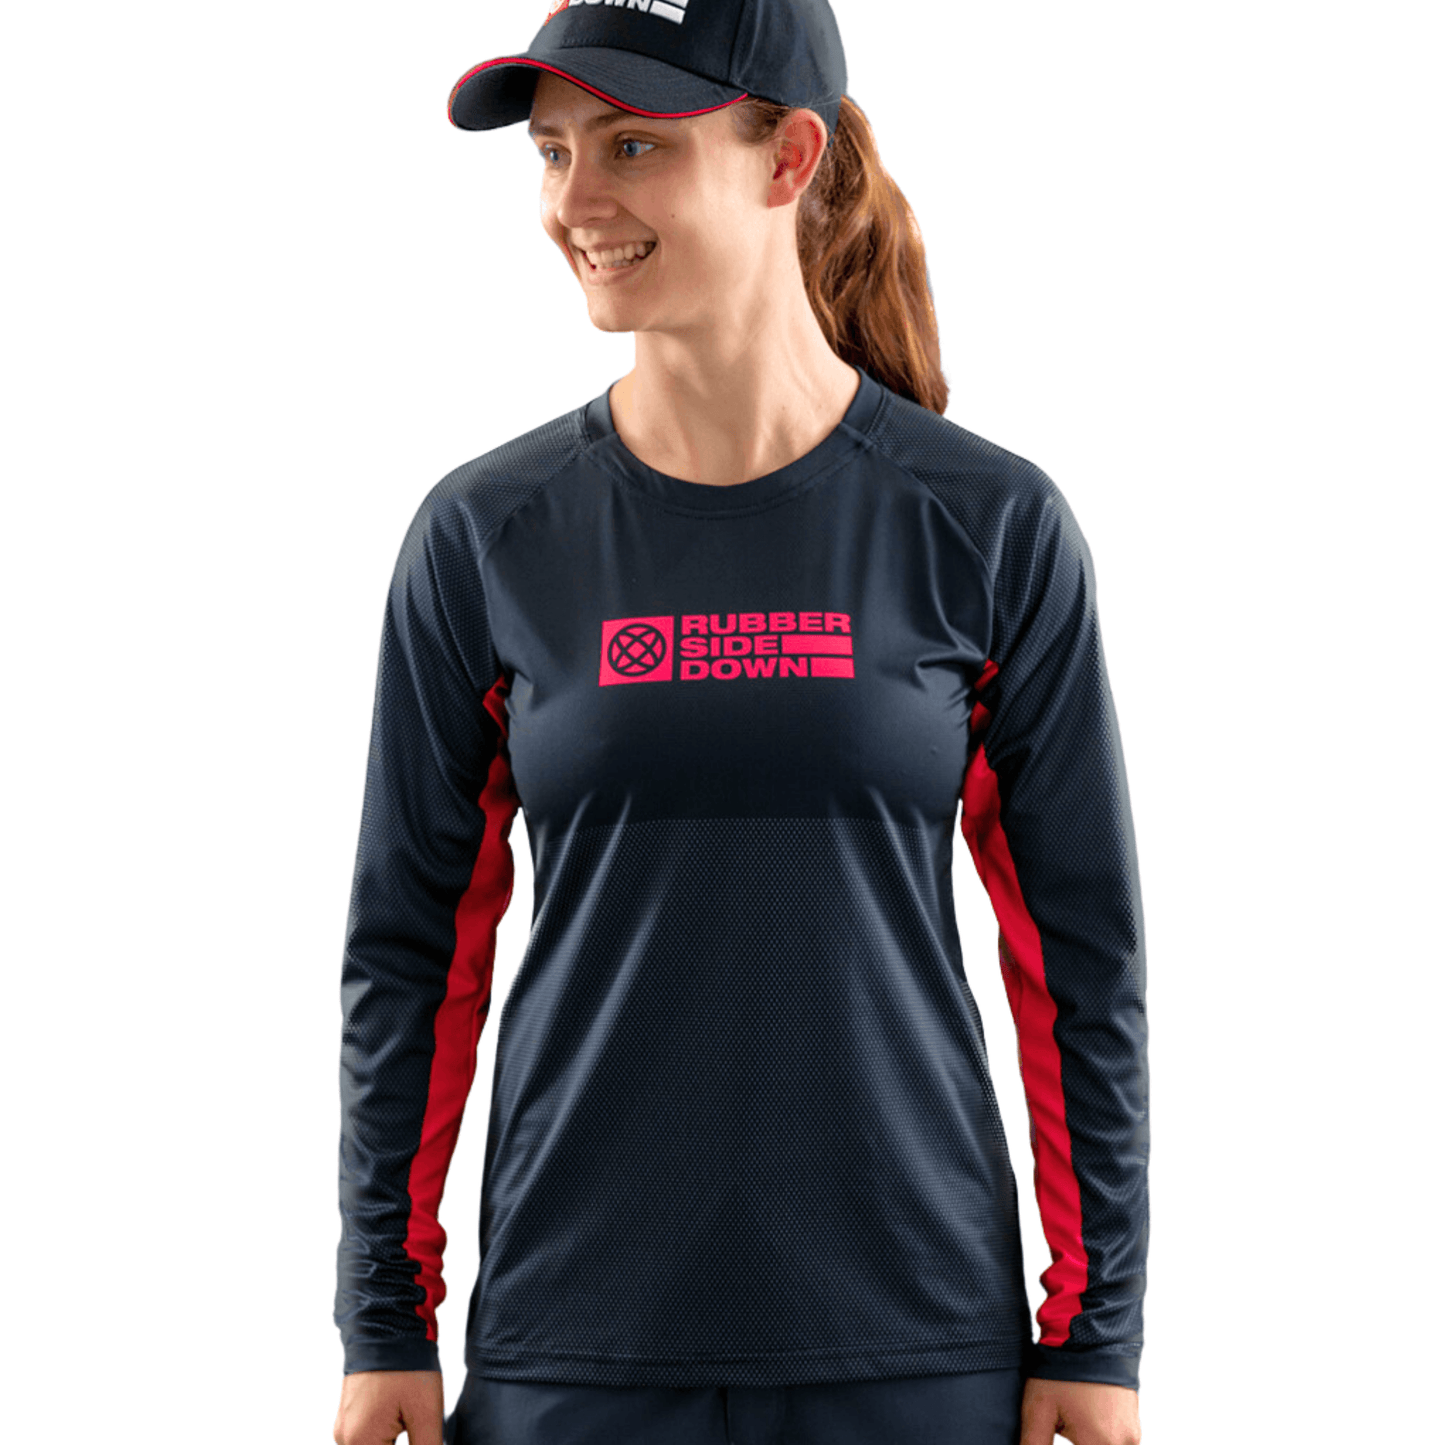 Rubber Side Down Women's Long Sleeve Jersey - Women's S - Pink Panther